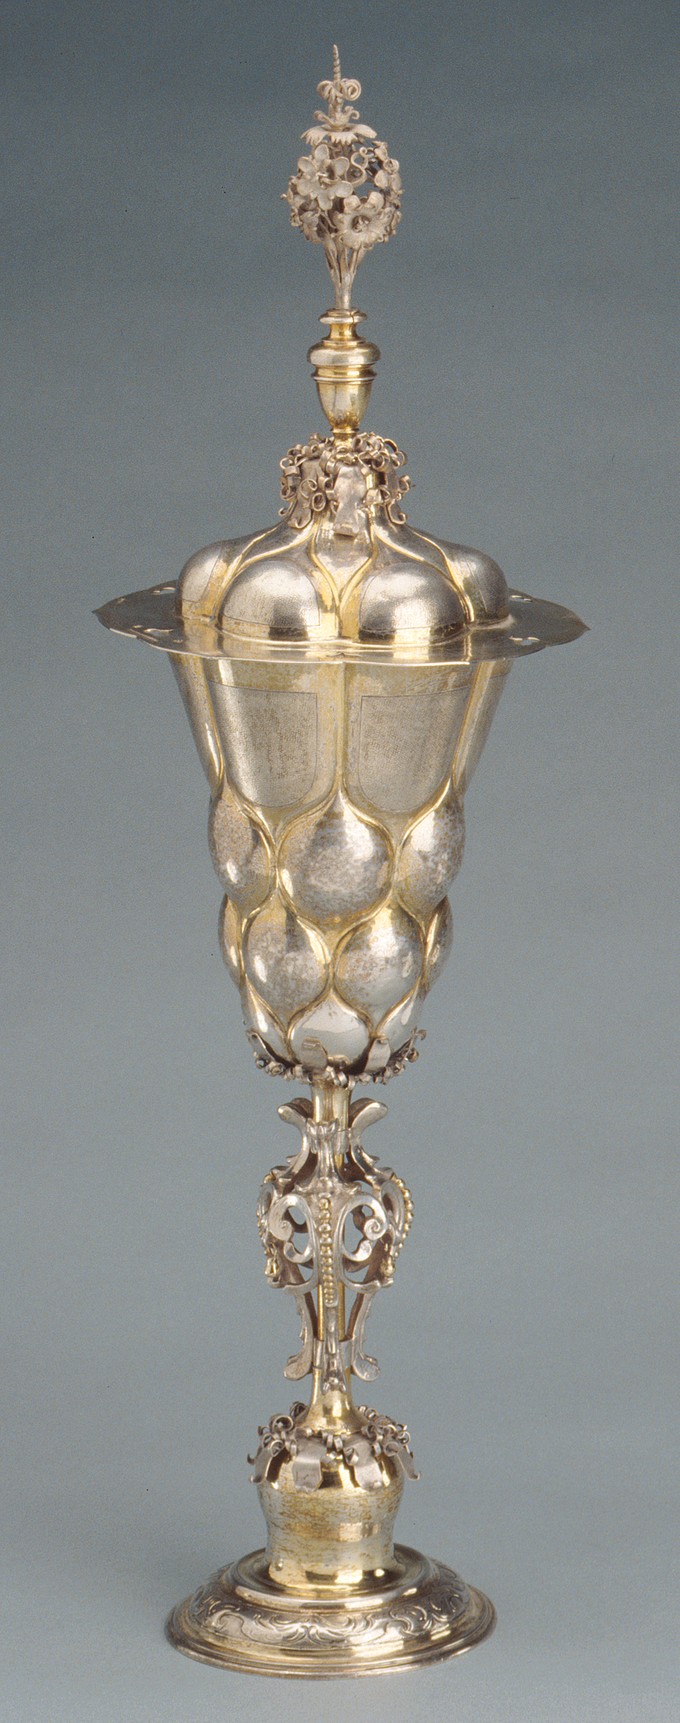 Standing Cup and Cover